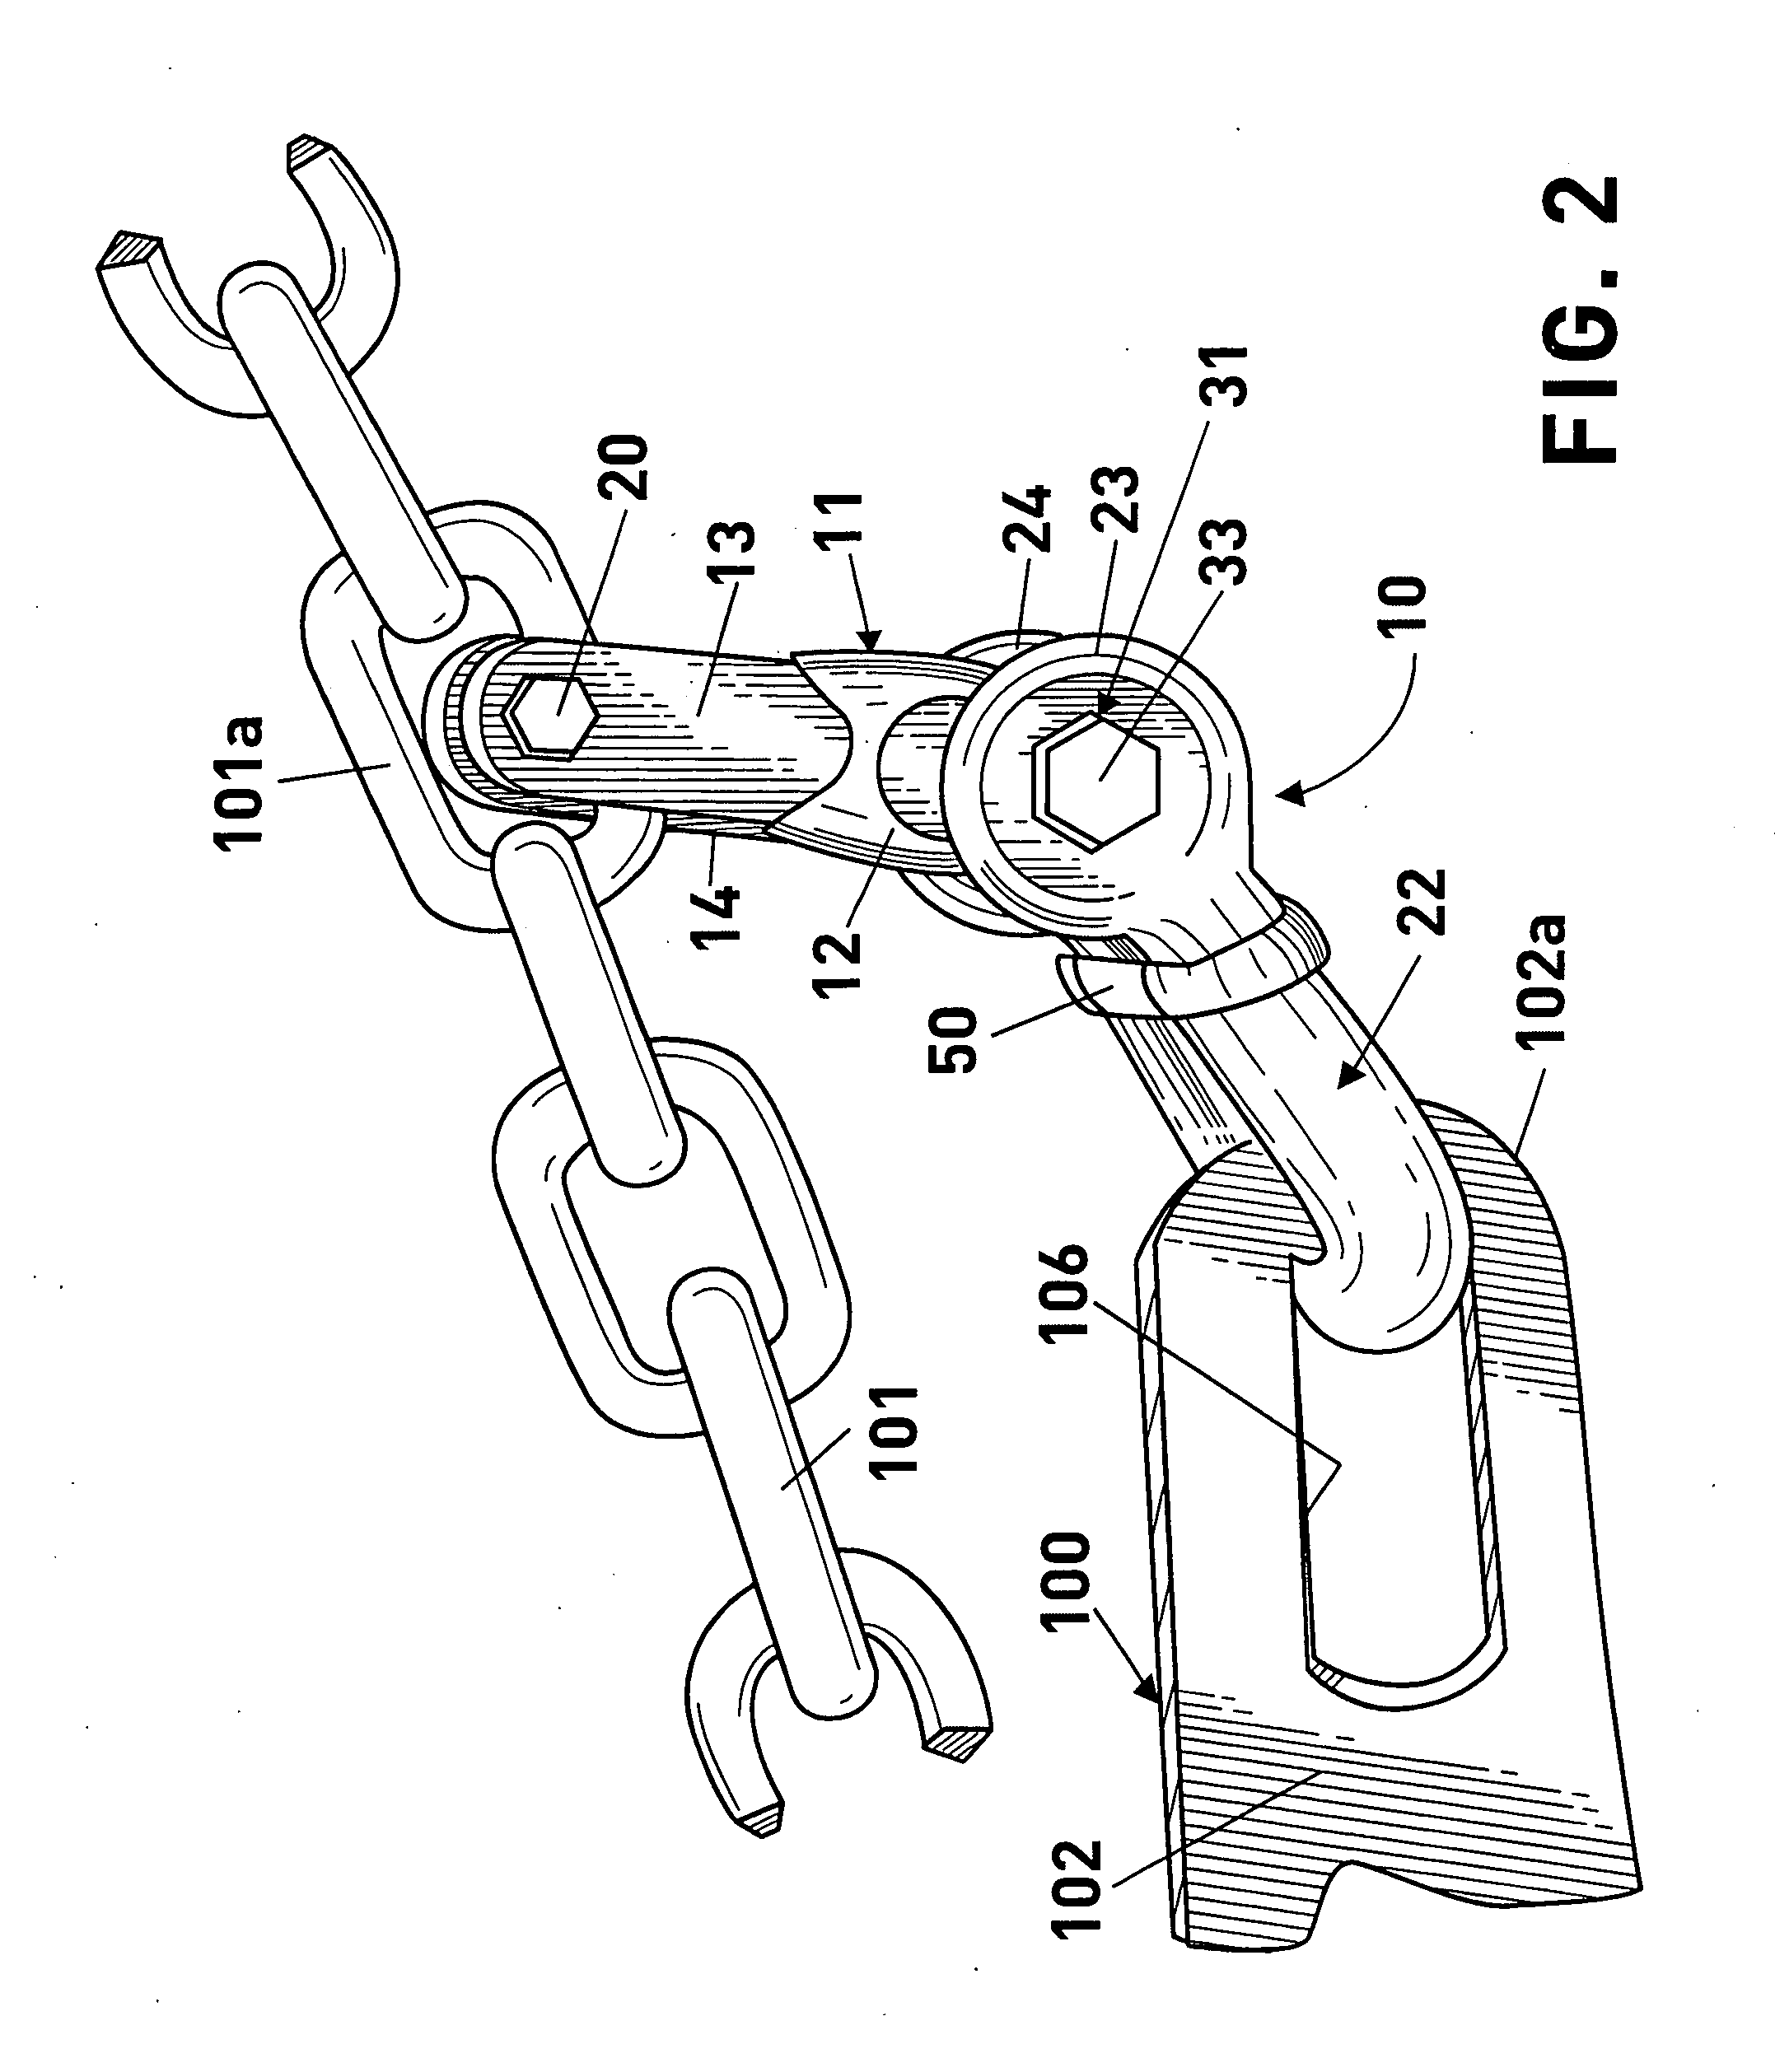 Anchor retrieval device, system and method